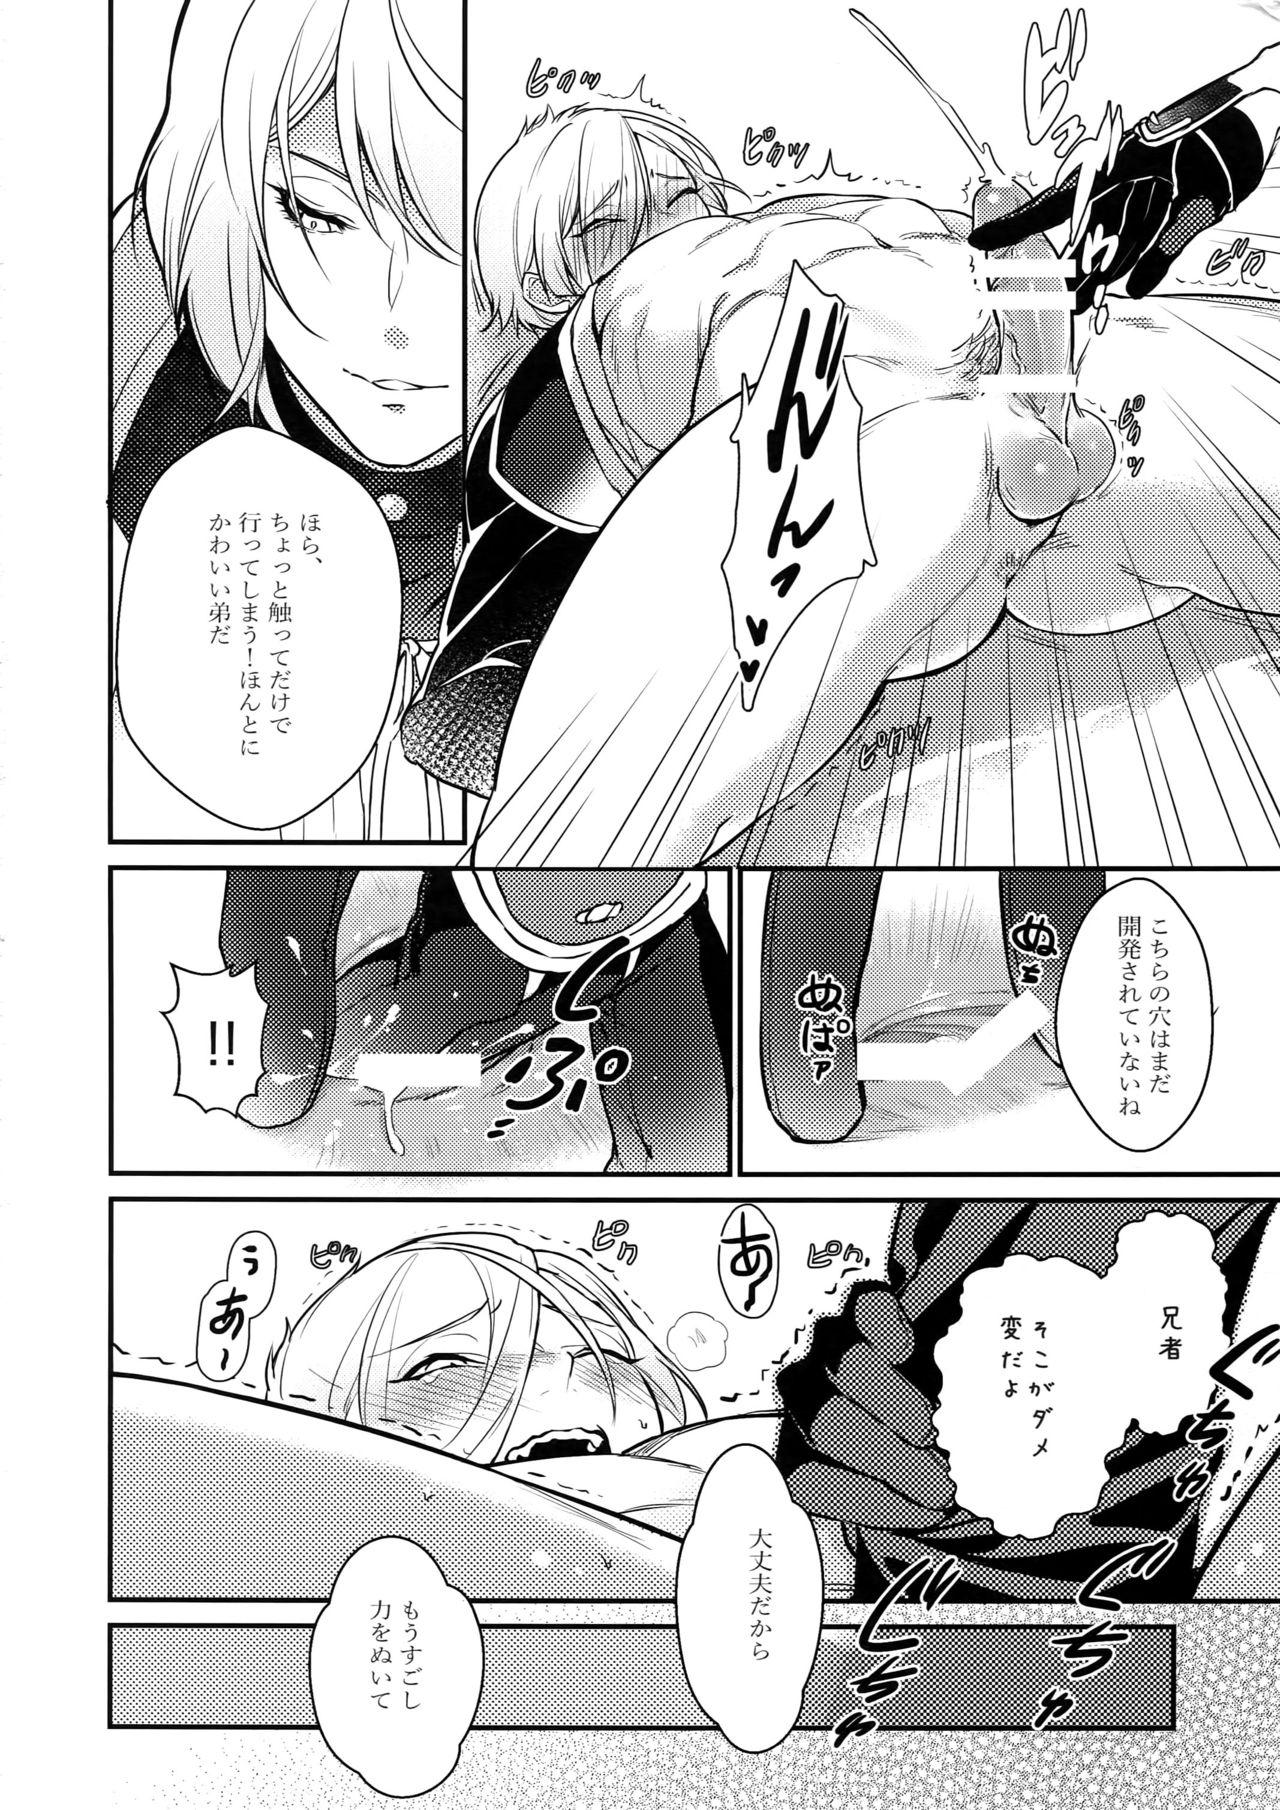 Culote Midnight - Touken ranbu Roughsex - Page 9